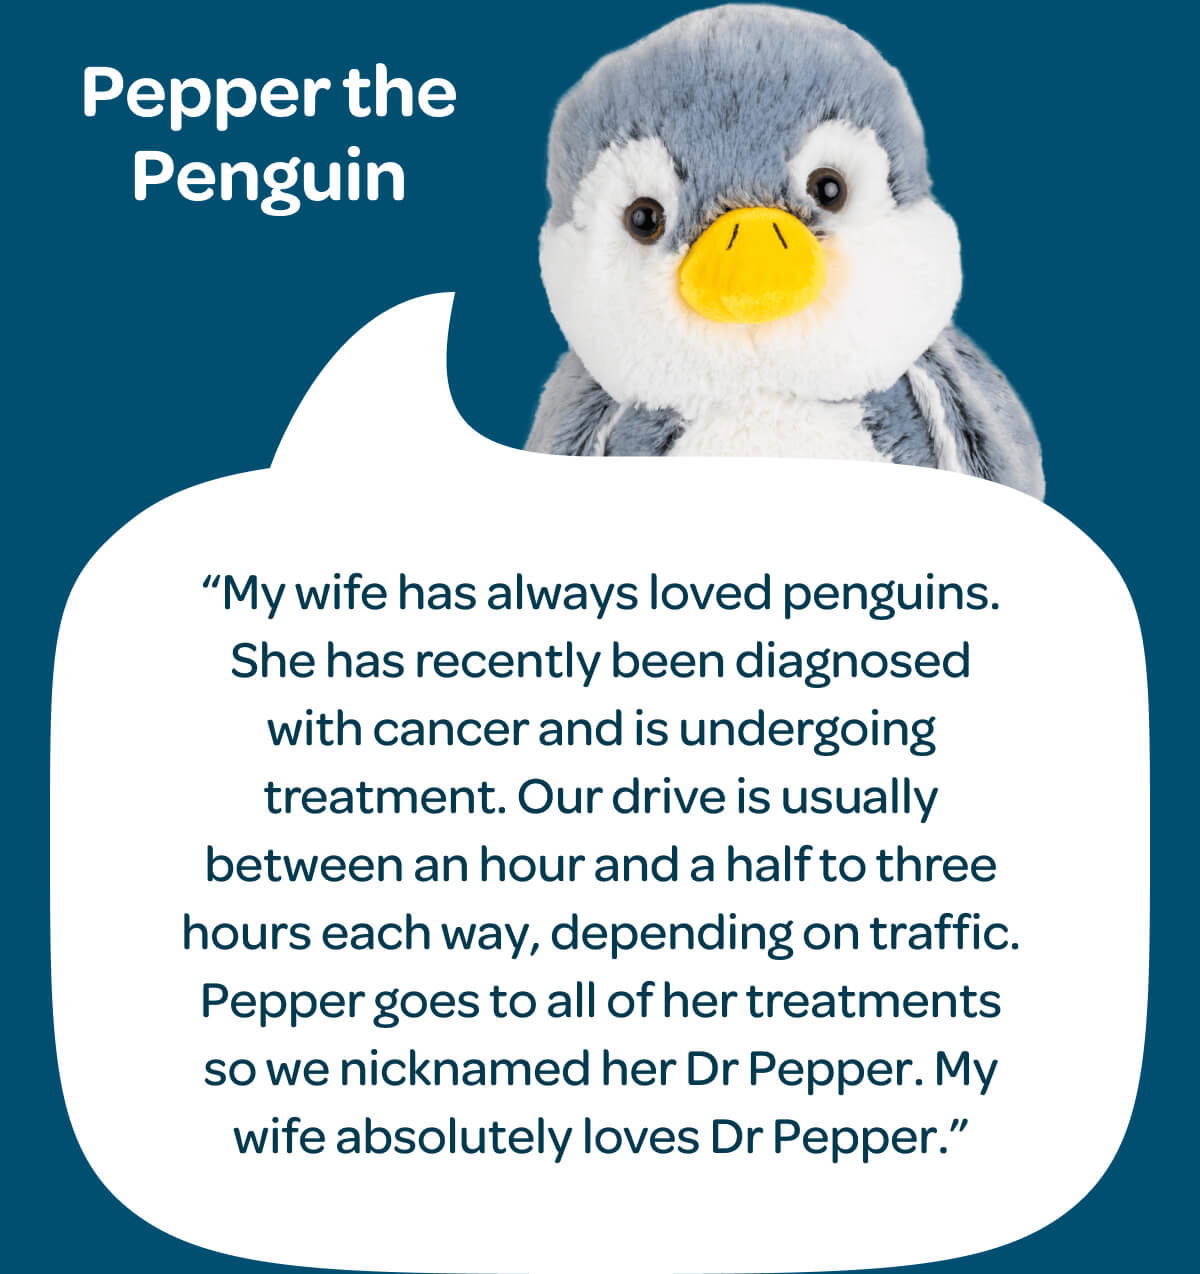 Pepper the Penguin. “My wife has always loved penguins. She has recently been diagnosed with cancer and is undergoing treatment. Our drive is usually between an hour and a half to three hours each way, depending on traffic. Pepper goes to all of her treatments so we nicknamed her Dr Pepper. My wife absolutely loves Dr Pepper.”